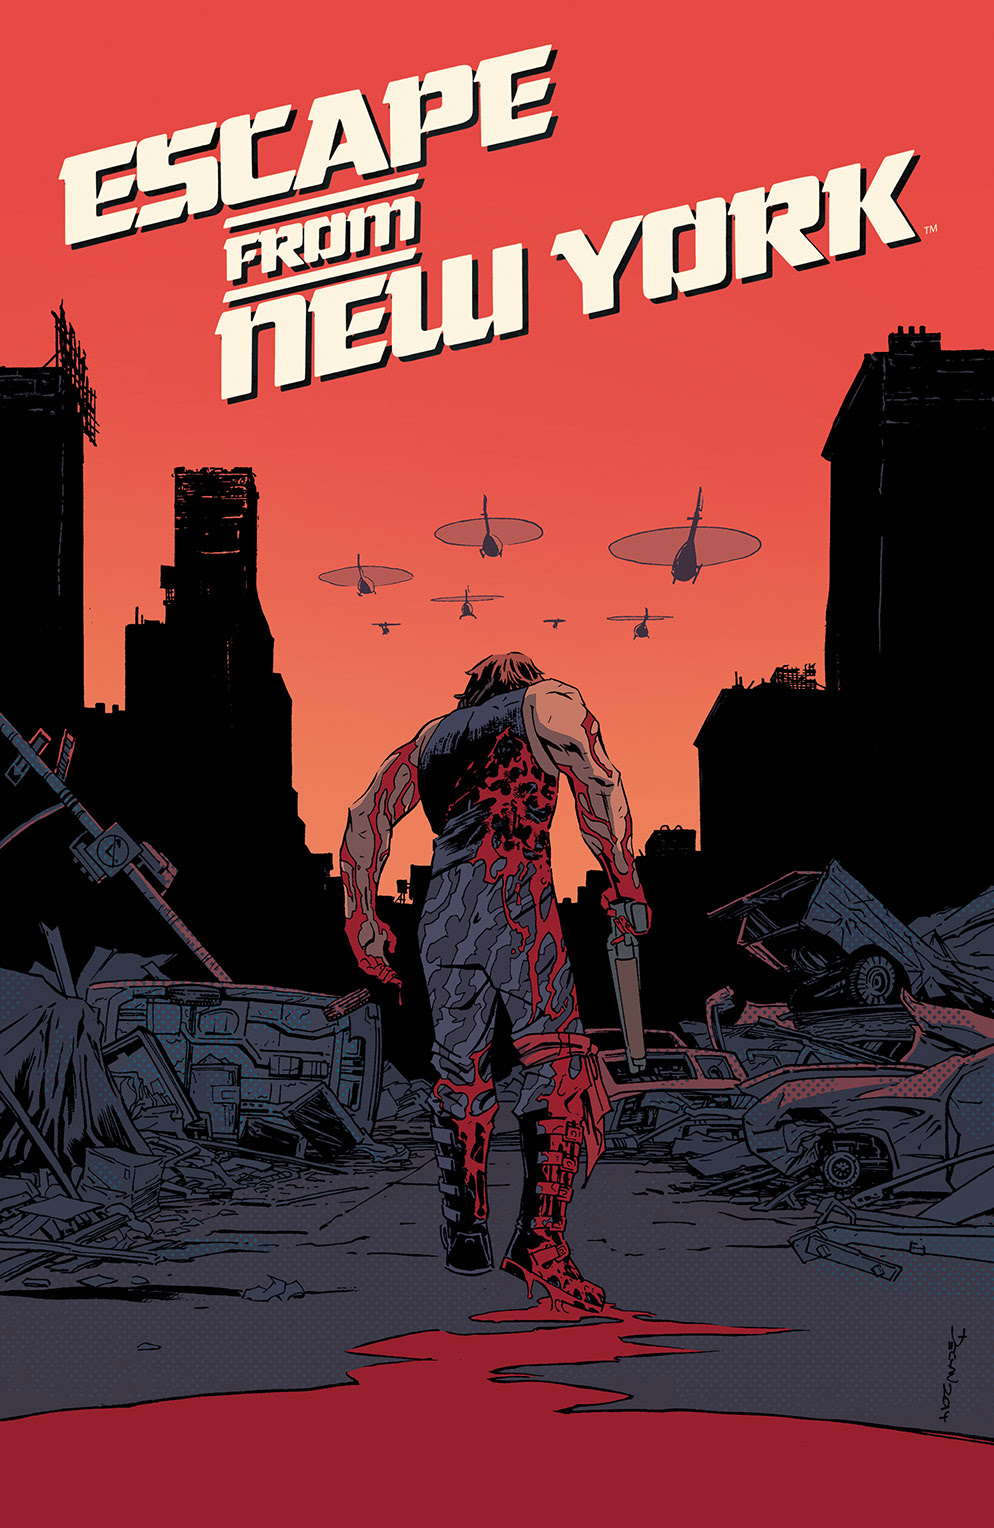 ESCAPE FROM NEW YORK #1 Cover A by Declan Shalvey